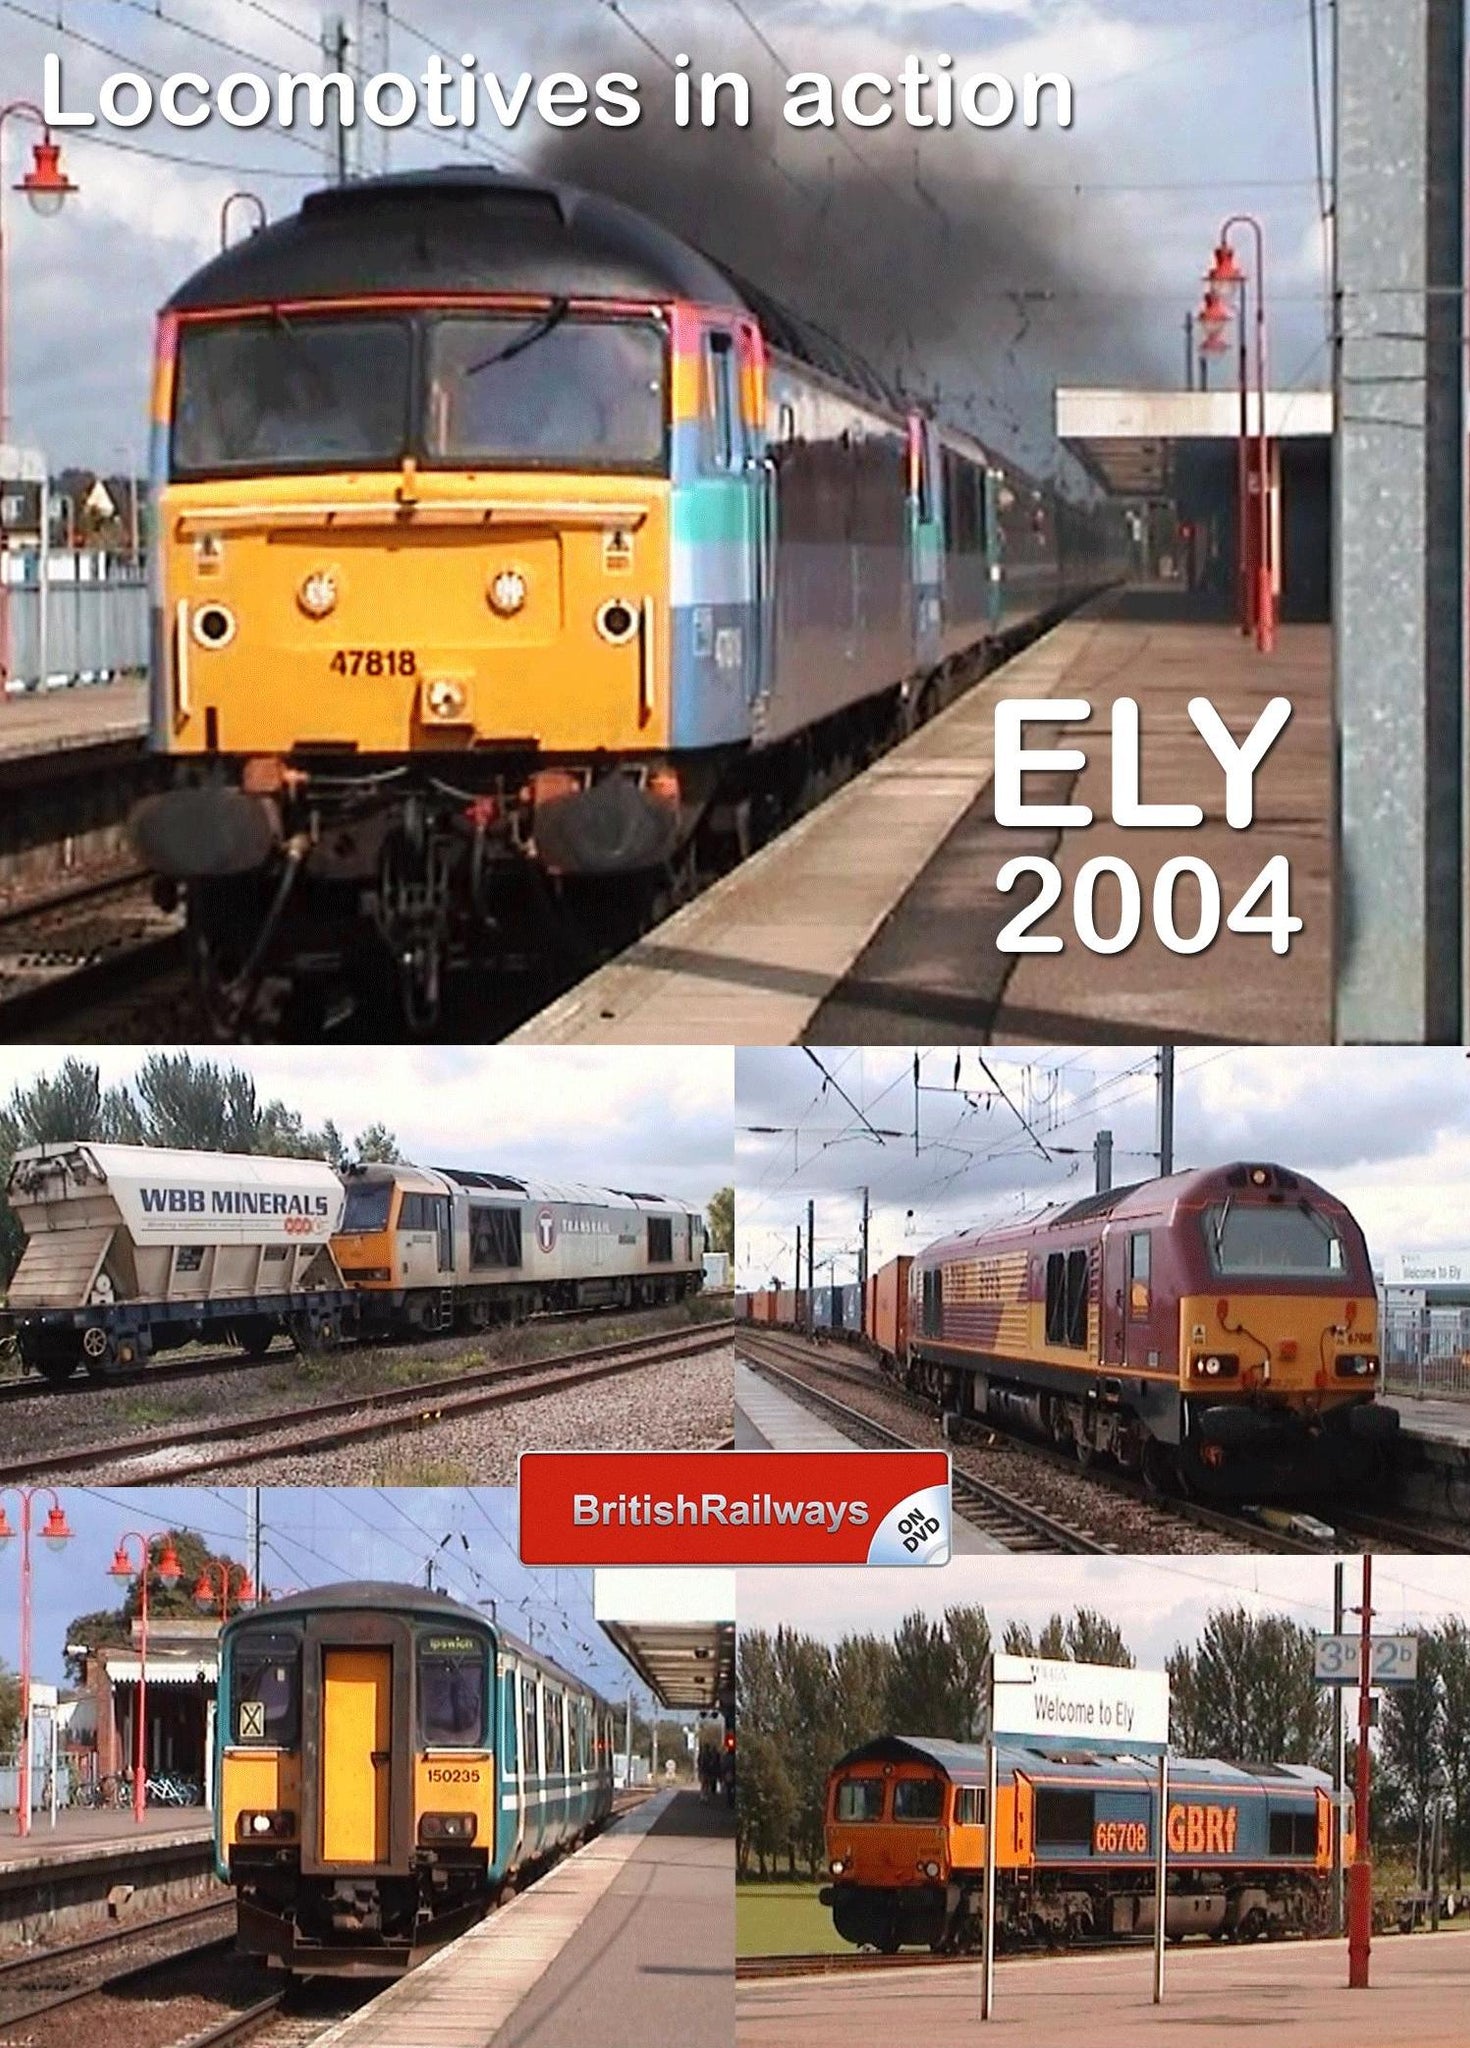 Locomotives in action at Ely 2004 - Railway DVD